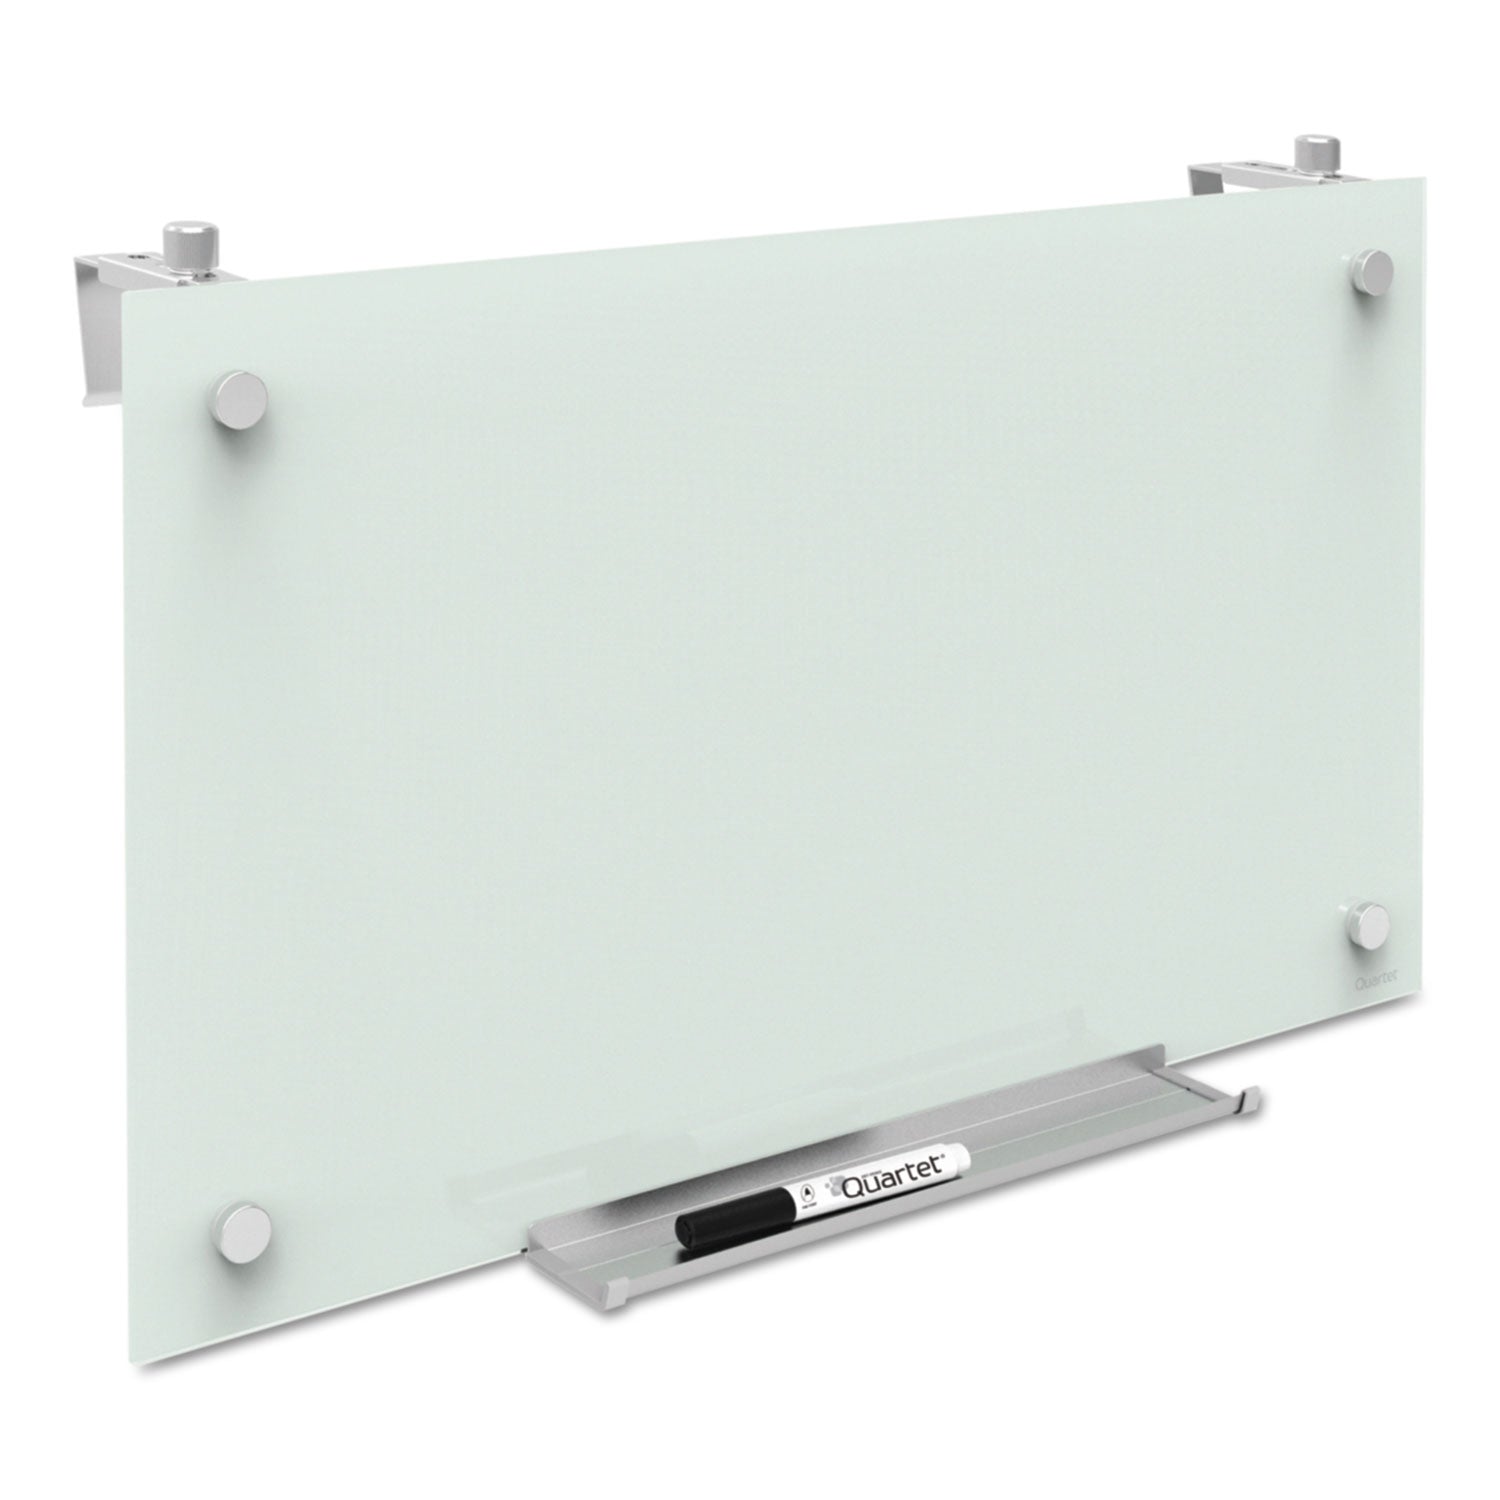 infinity-magnetic-glass-dry-erase-cubicle-board-30-x-18-white-surface_qrtpdec1830 - 2